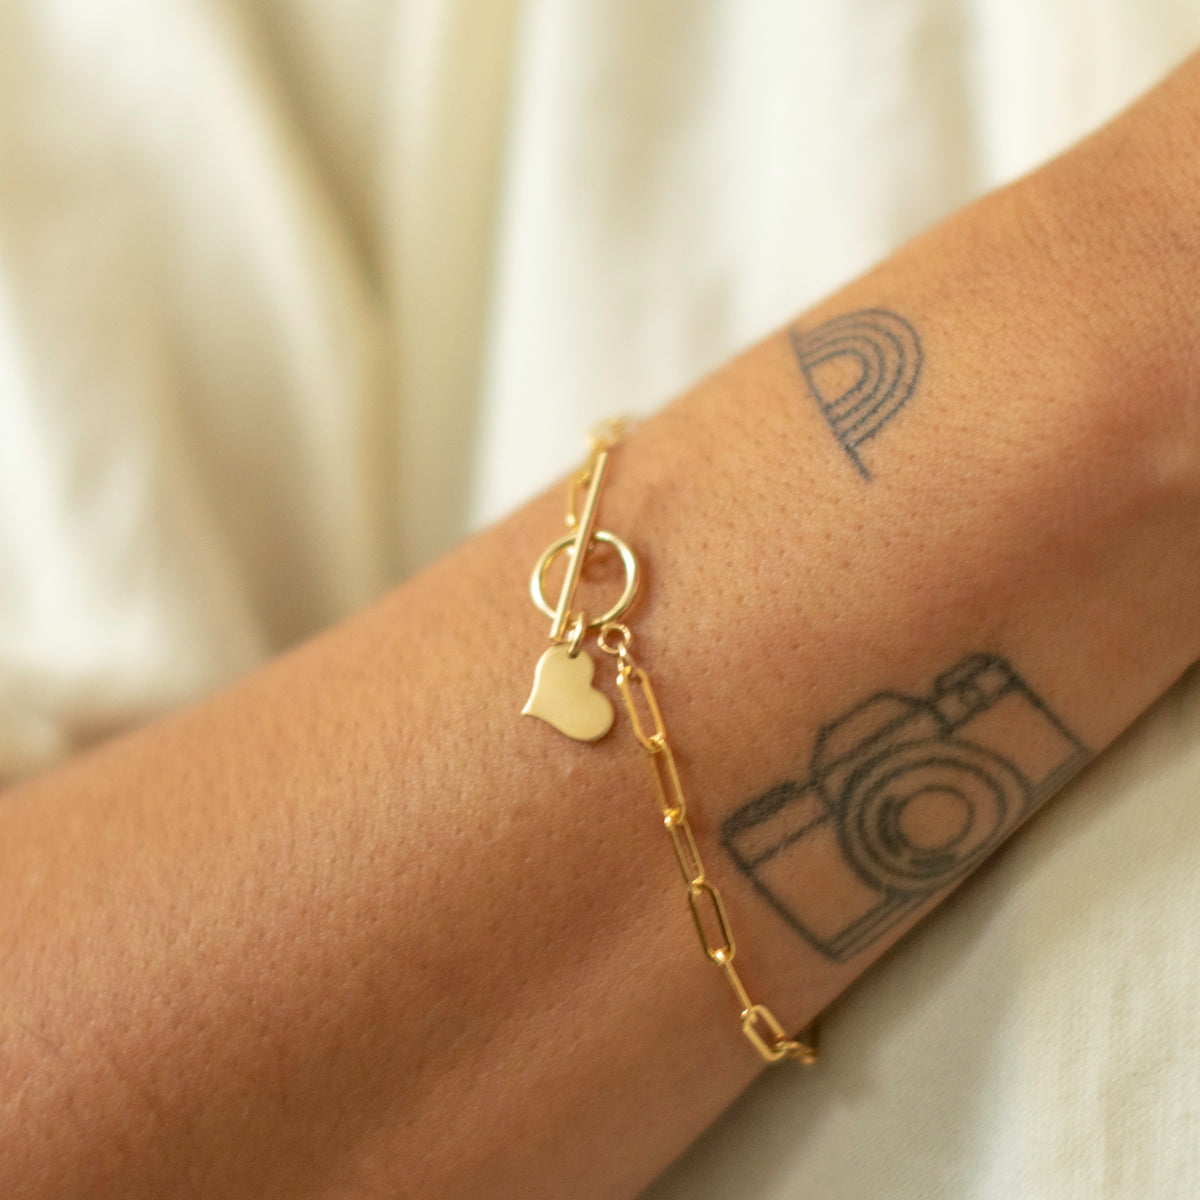 14K Gold Filled Tiny Heart Charm on a Bold Paper Clip Bracelet with Toggle Closure